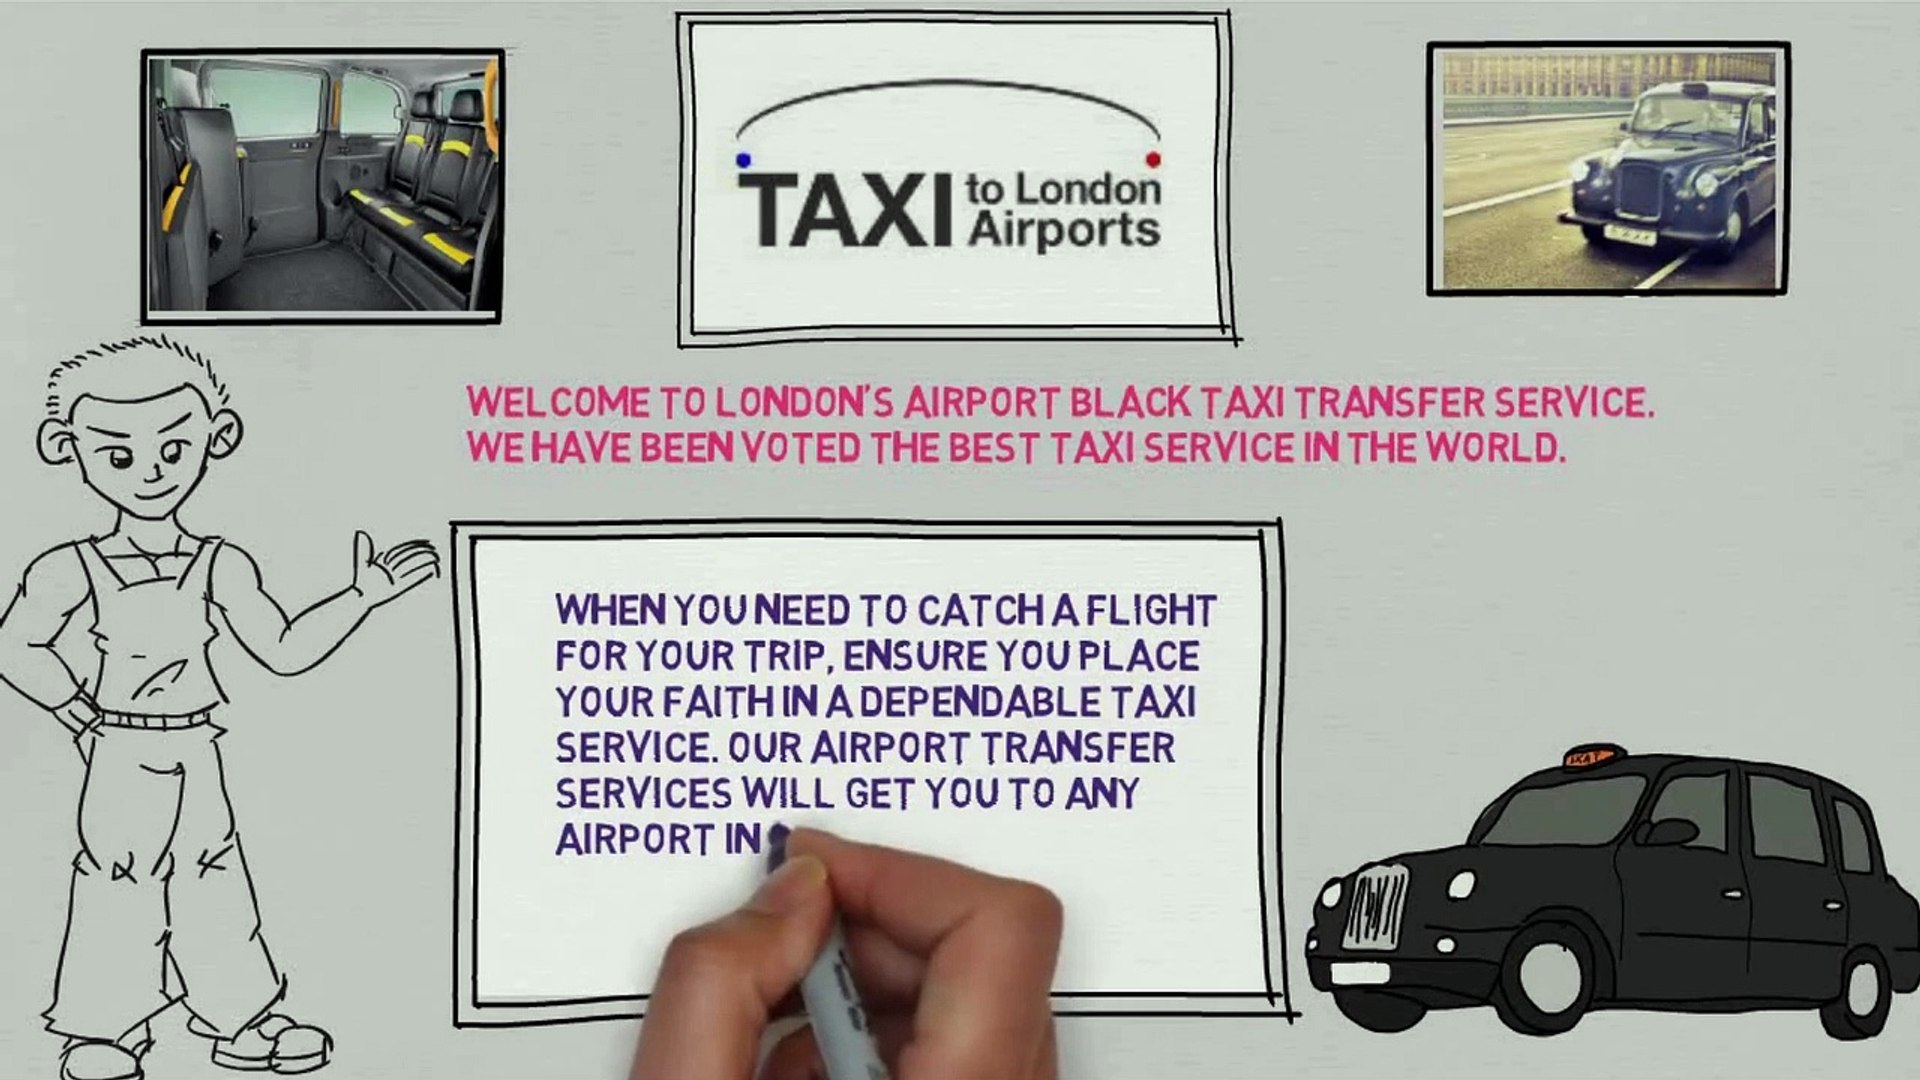 Short Video for Taxi To London Airports - video dailymotion